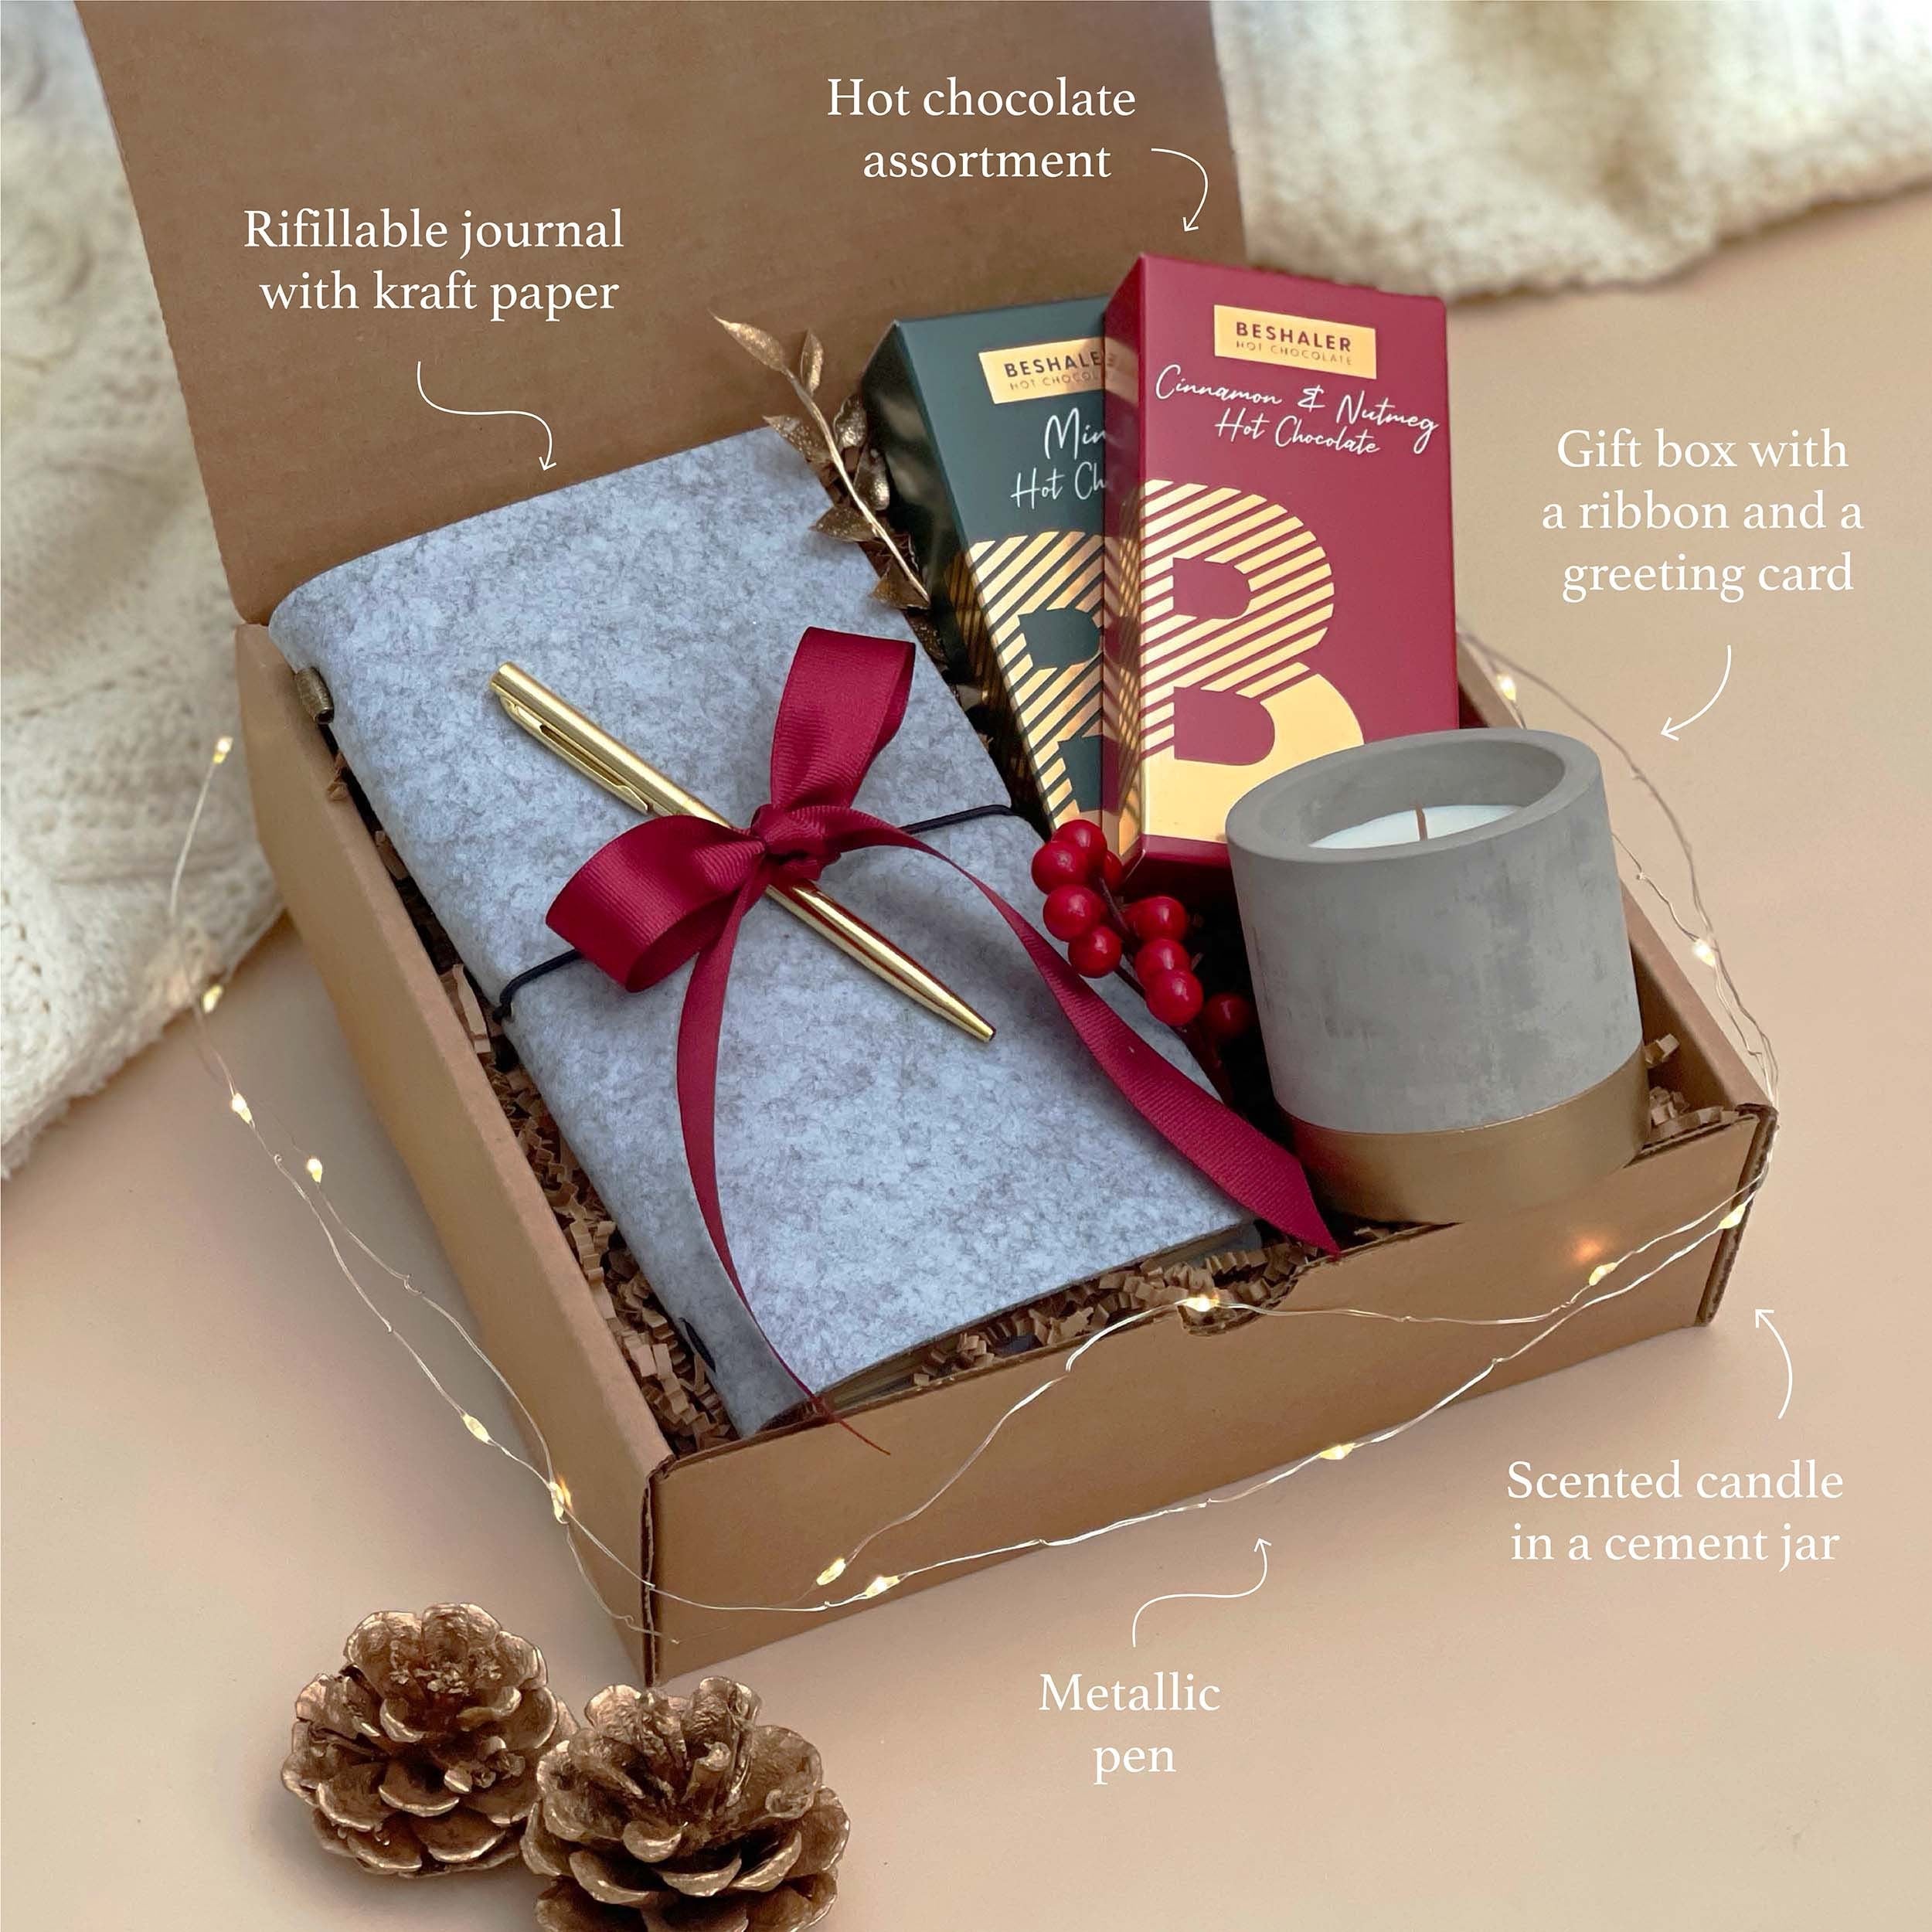 100 Bulk Client Gifts To Order To Make Client Gifting Easier